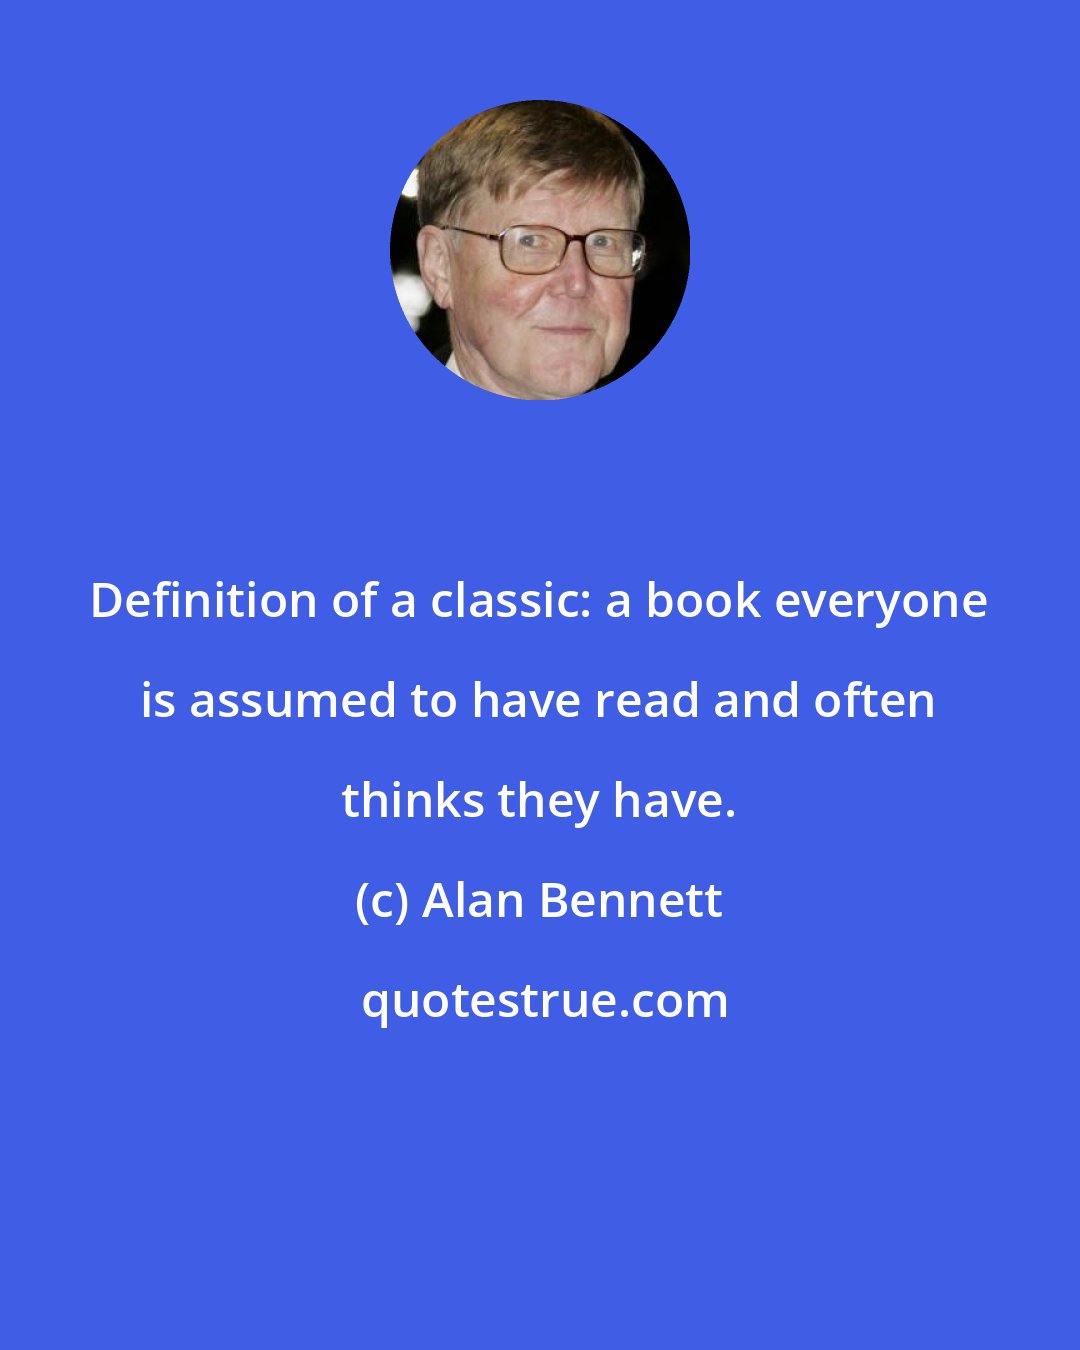 Alan Bennett: Definition of a classic: a book everyone is assumed to have read and often thinks they have.